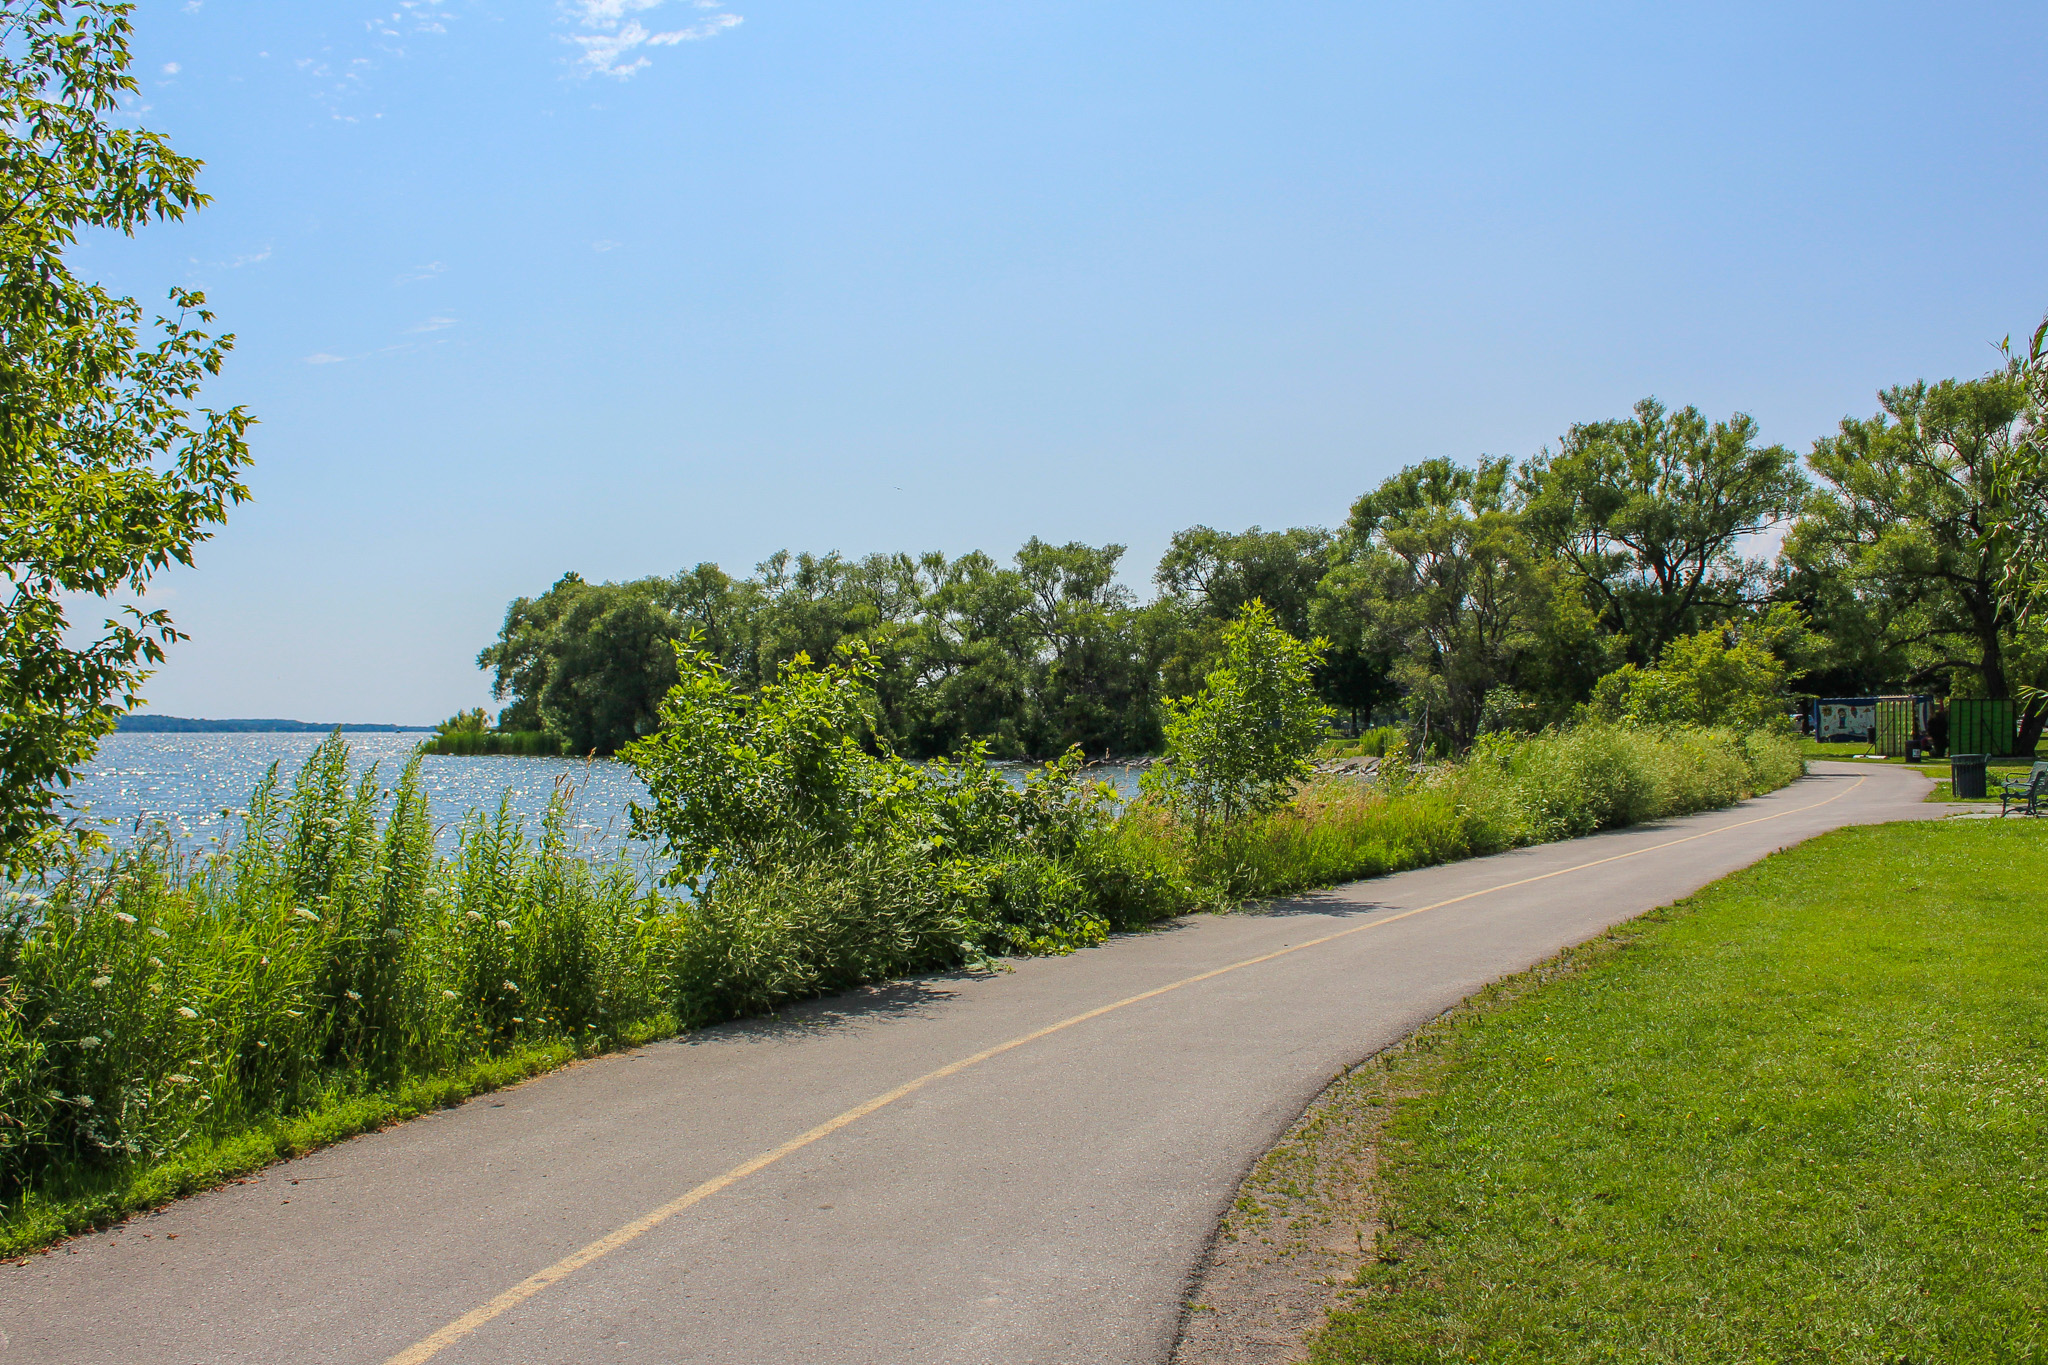 Photo of the Zwick's Park Trail